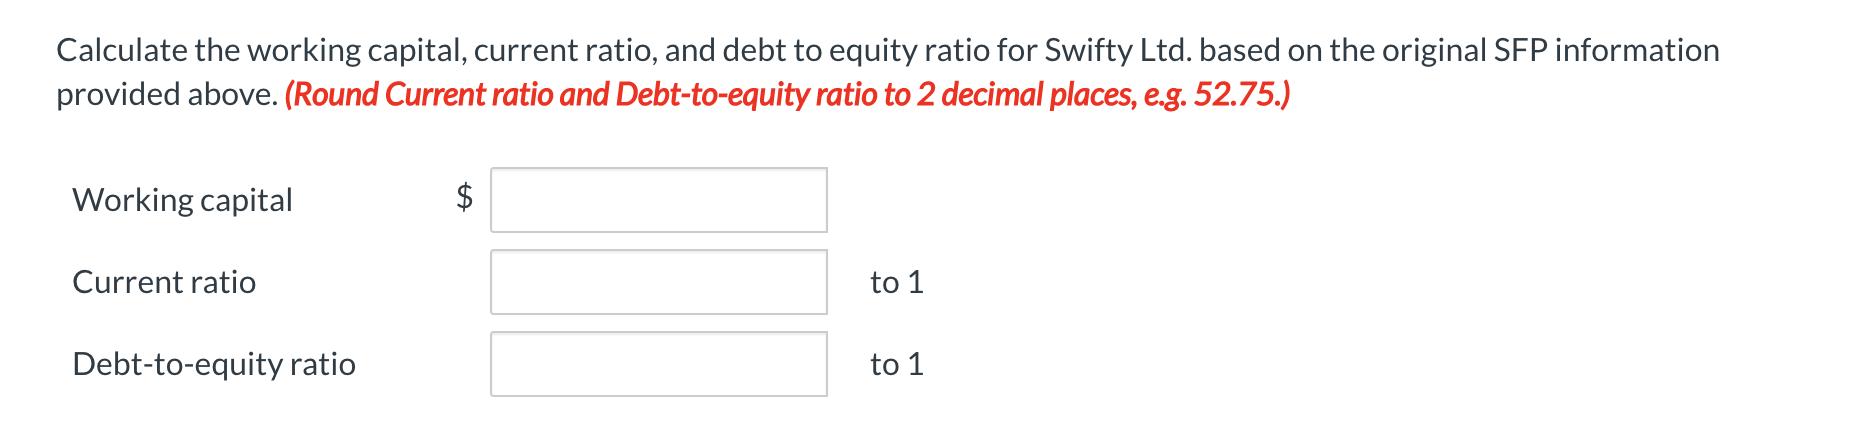 Calculate the working capital, current ratio, and debt to equity ratio for Swifty Ltd. based on the original SFP information